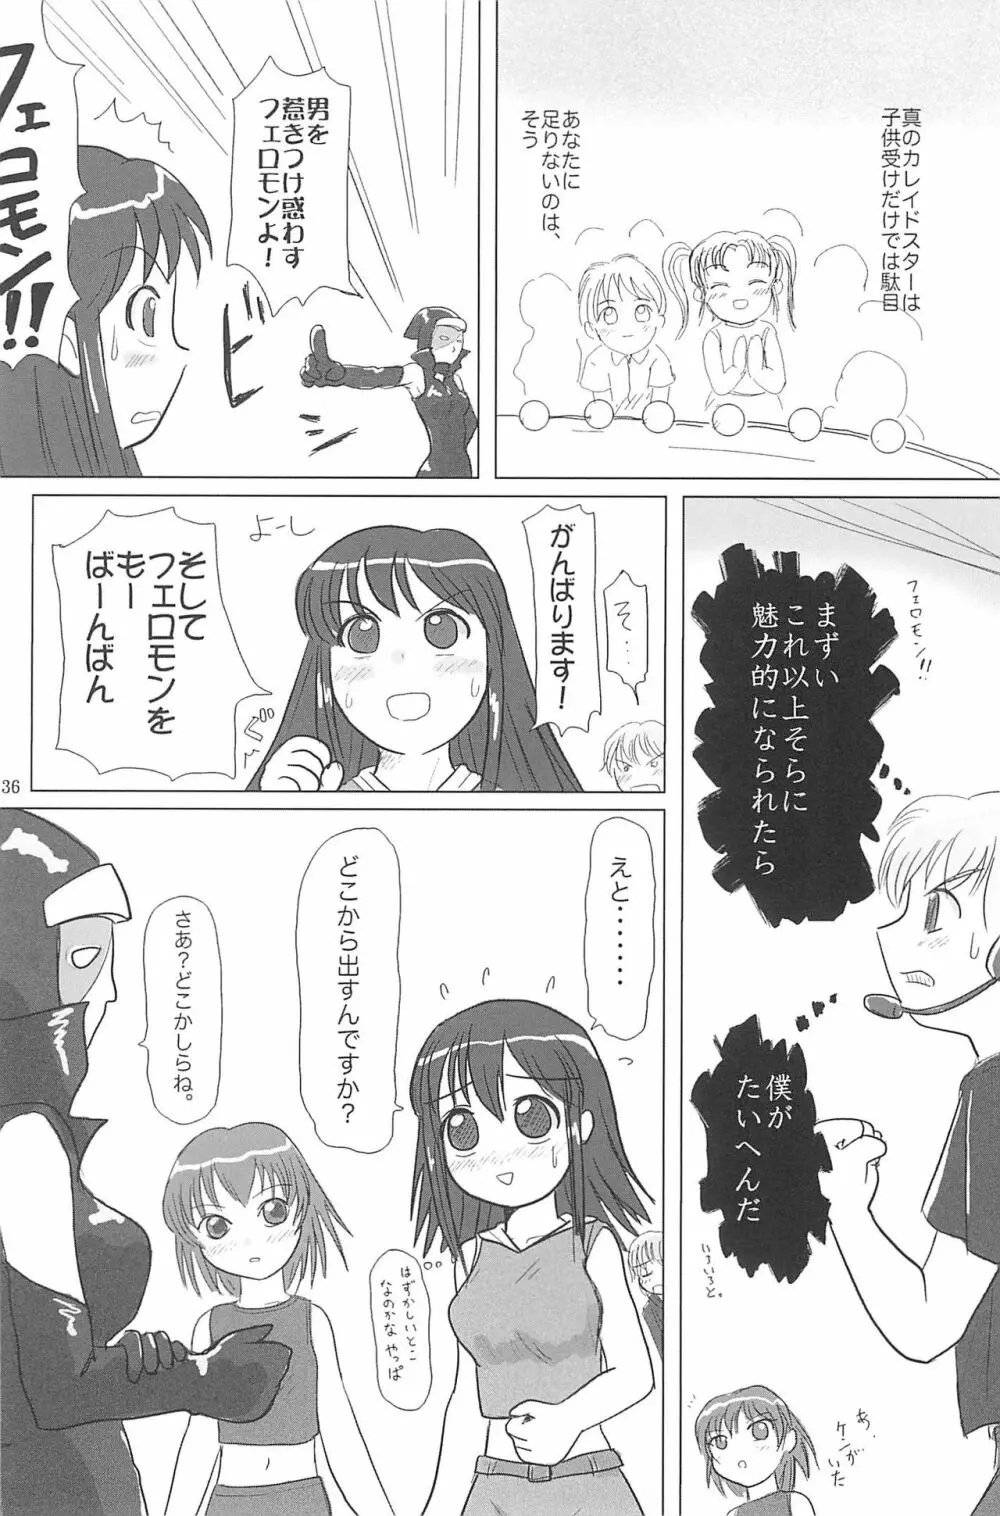 ND-special Volume 5 36ページ